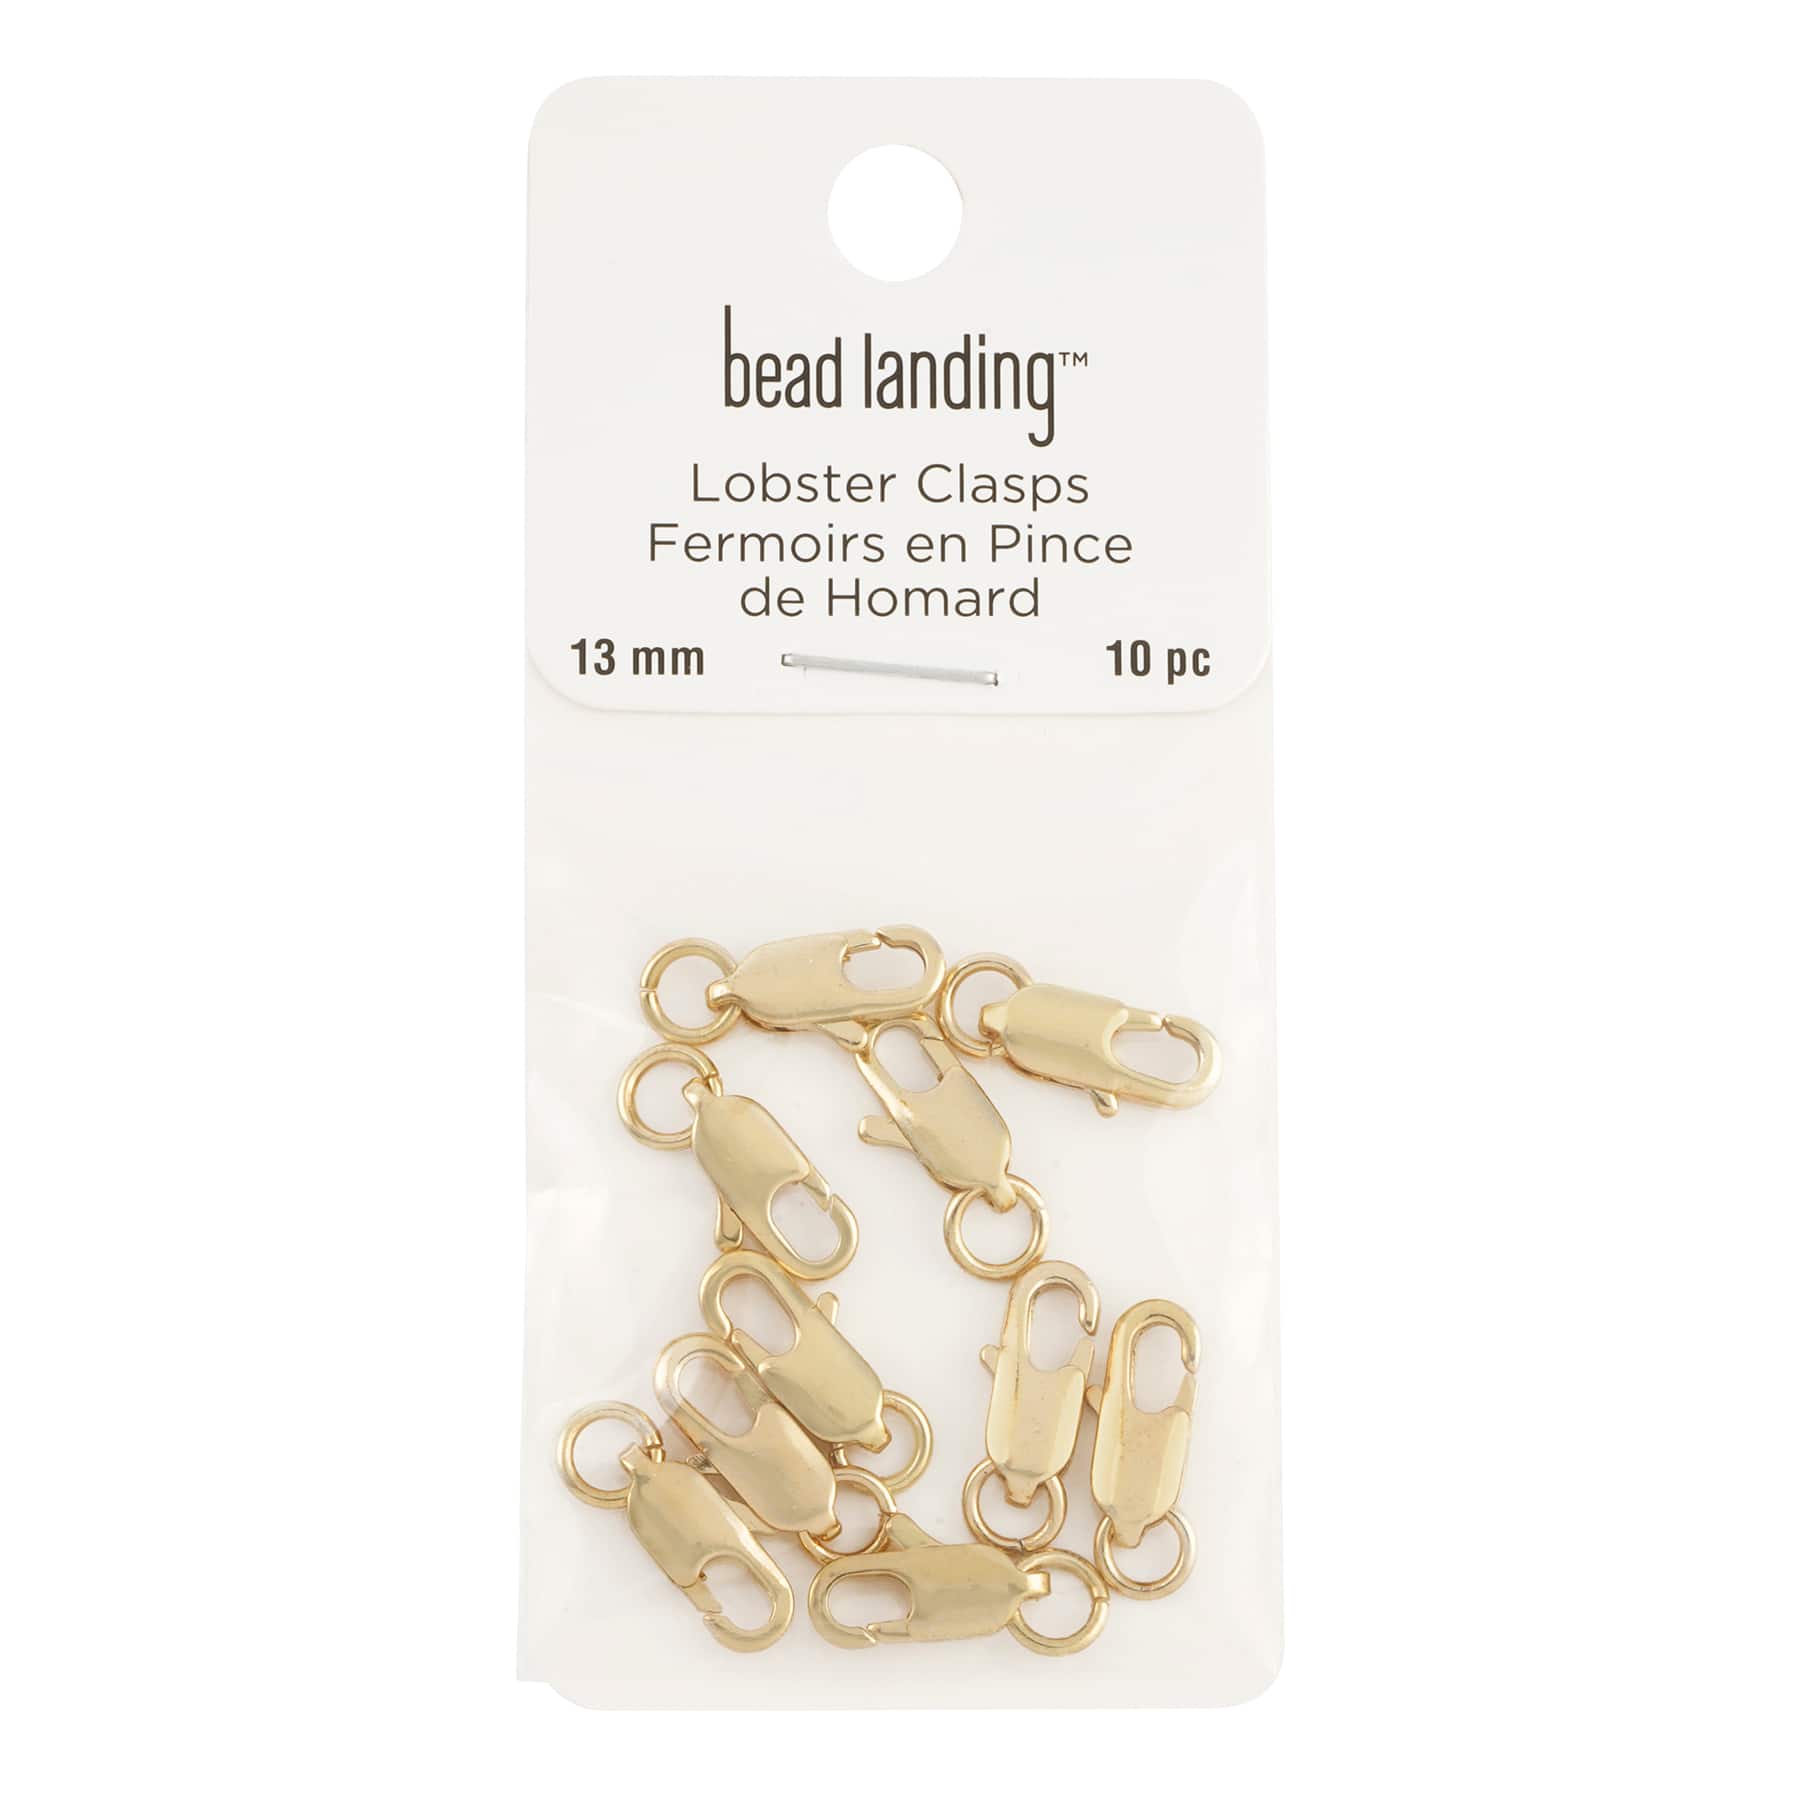 12 Packs: 10 ct. (120 total) 13mm Lobster Clasps by Bead Landing&#x2122;